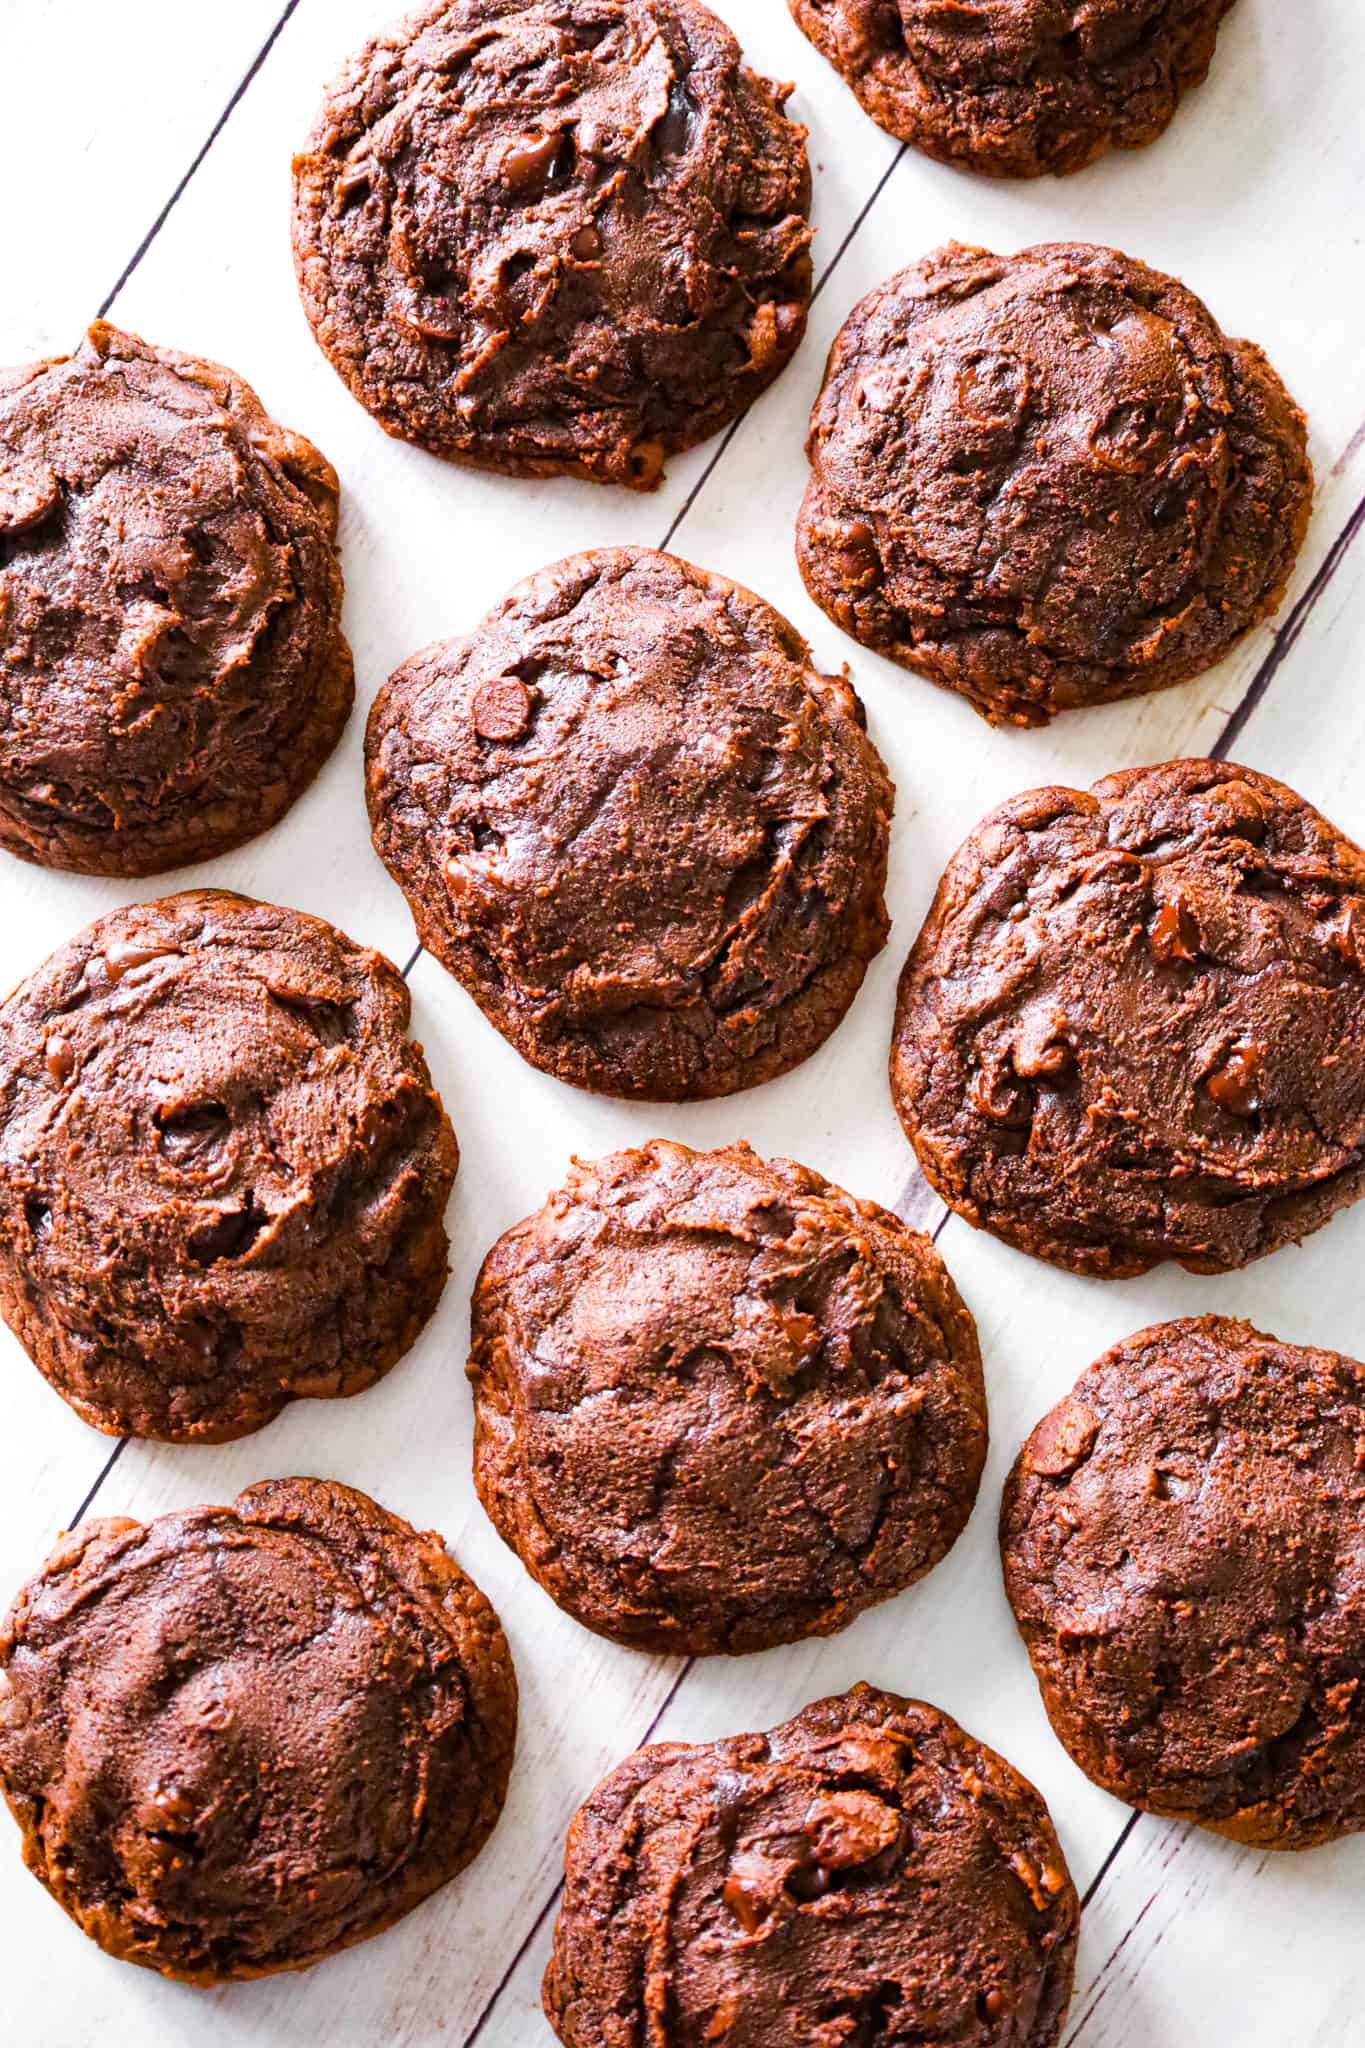 Brownie Mix Cookies Are An Easy Chocolate Cookie Recipe Using Boxed